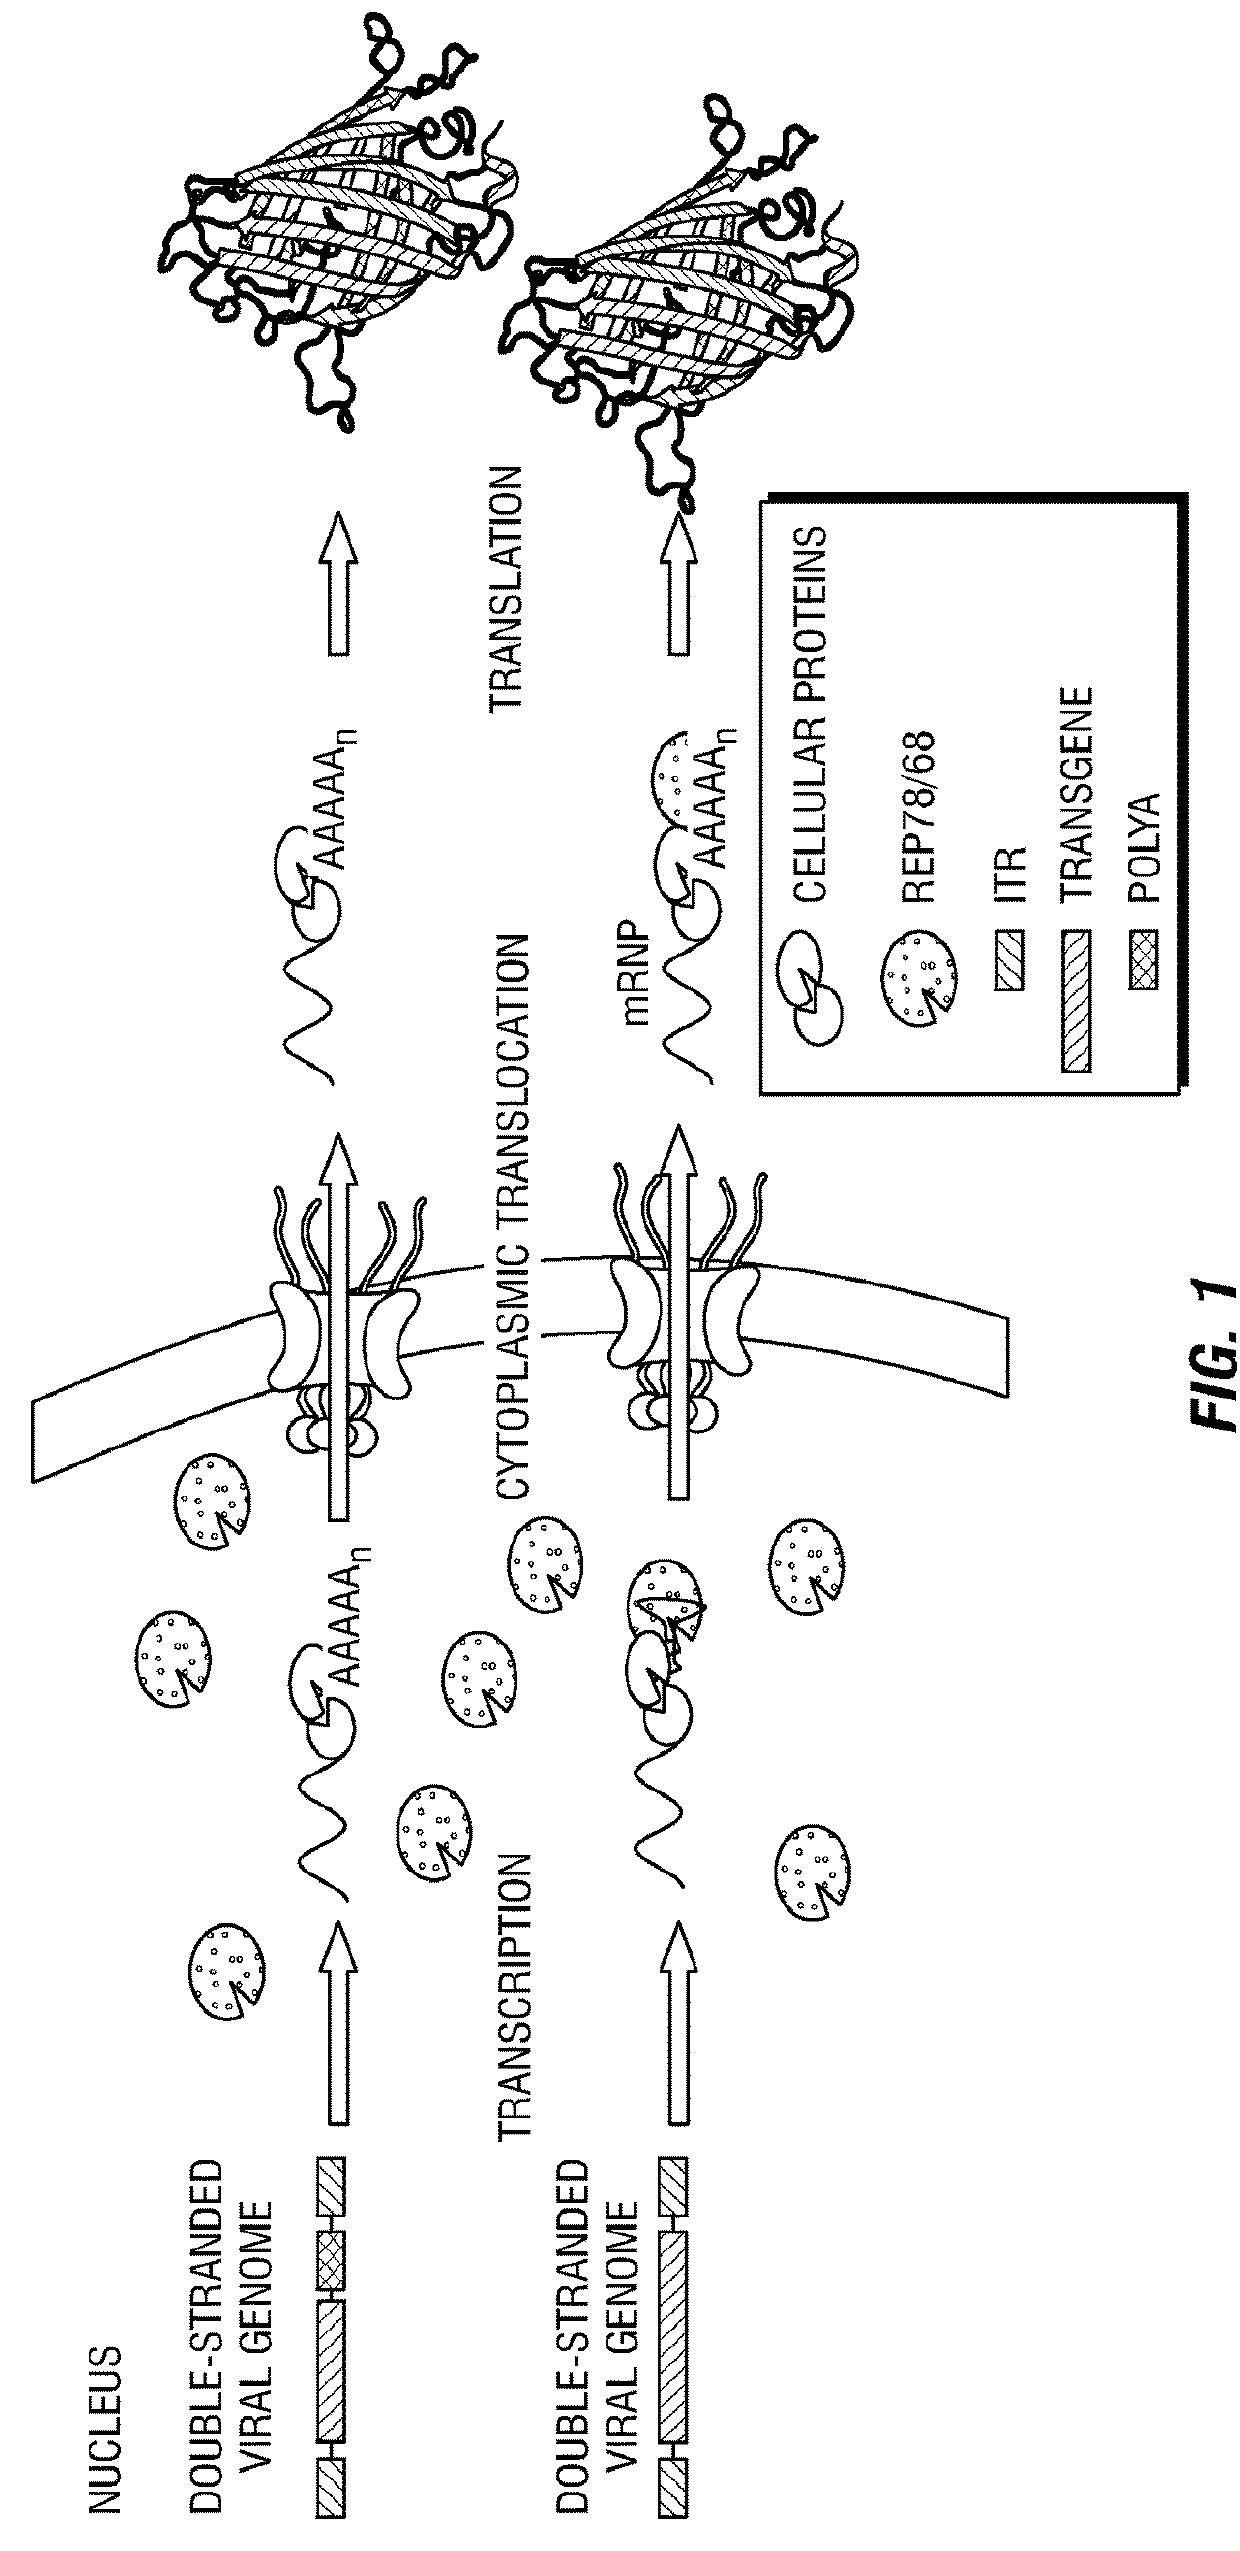 Hairpin mRNA elements and methods for the regulation of protein translation